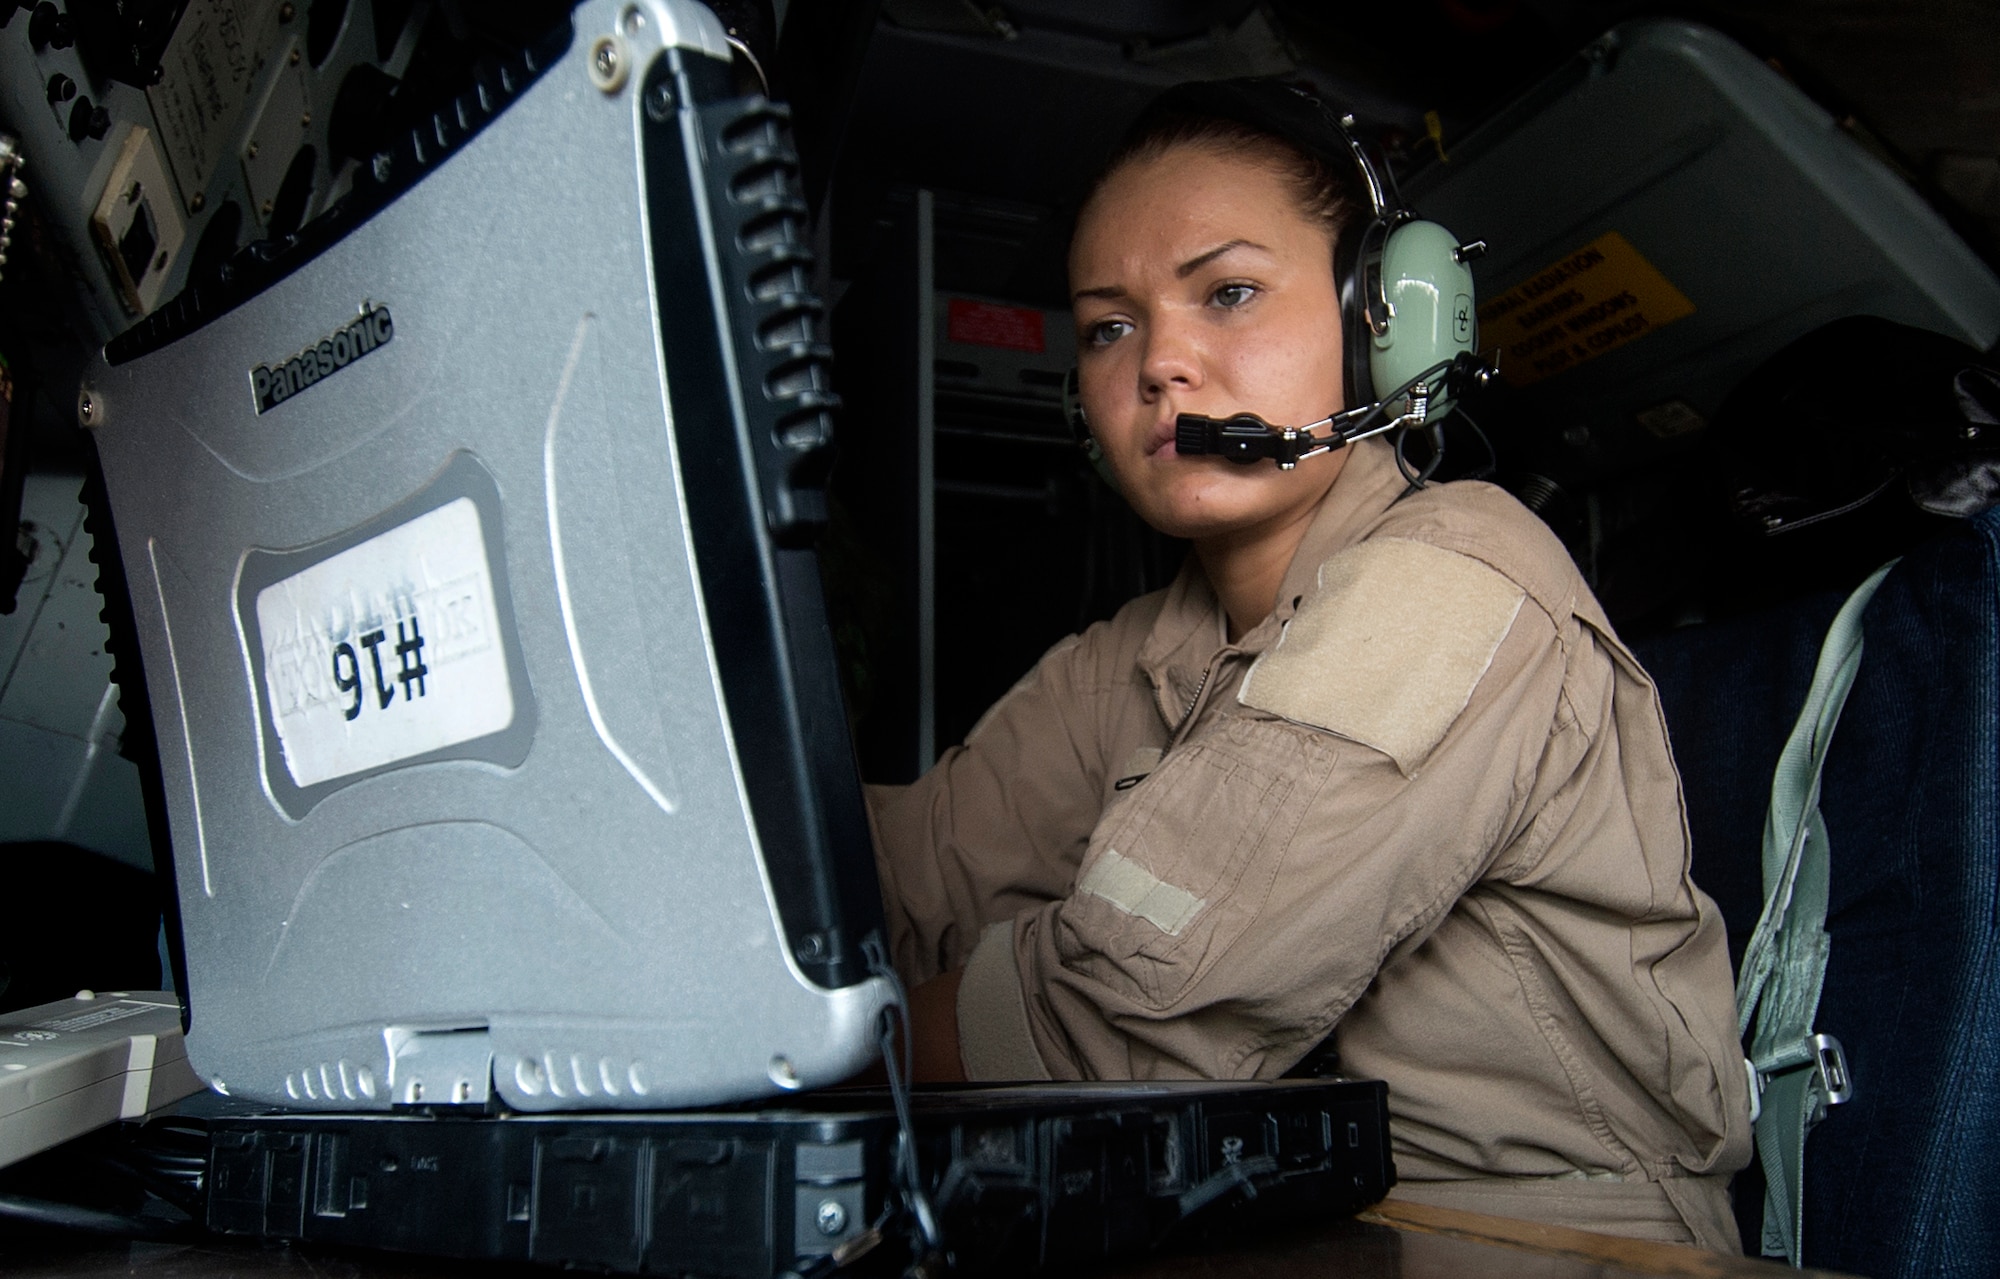 U.S. Air Force Airmen 1st Class Shelby Bowling, 340th Expeditionary Air Refueling Squadron boom operator, performs pre-flight checklists at Al Udeid Air Base, Qatar, in support of Operation Inherent Resolve, Dec. 31, 2015. The 340th EARS reached a significant milestone for 2015 by flying more than 100,000 combat hours before the new year. (U.S. Air Force photo by Tech. Sgt. Nathan Lipscomb)